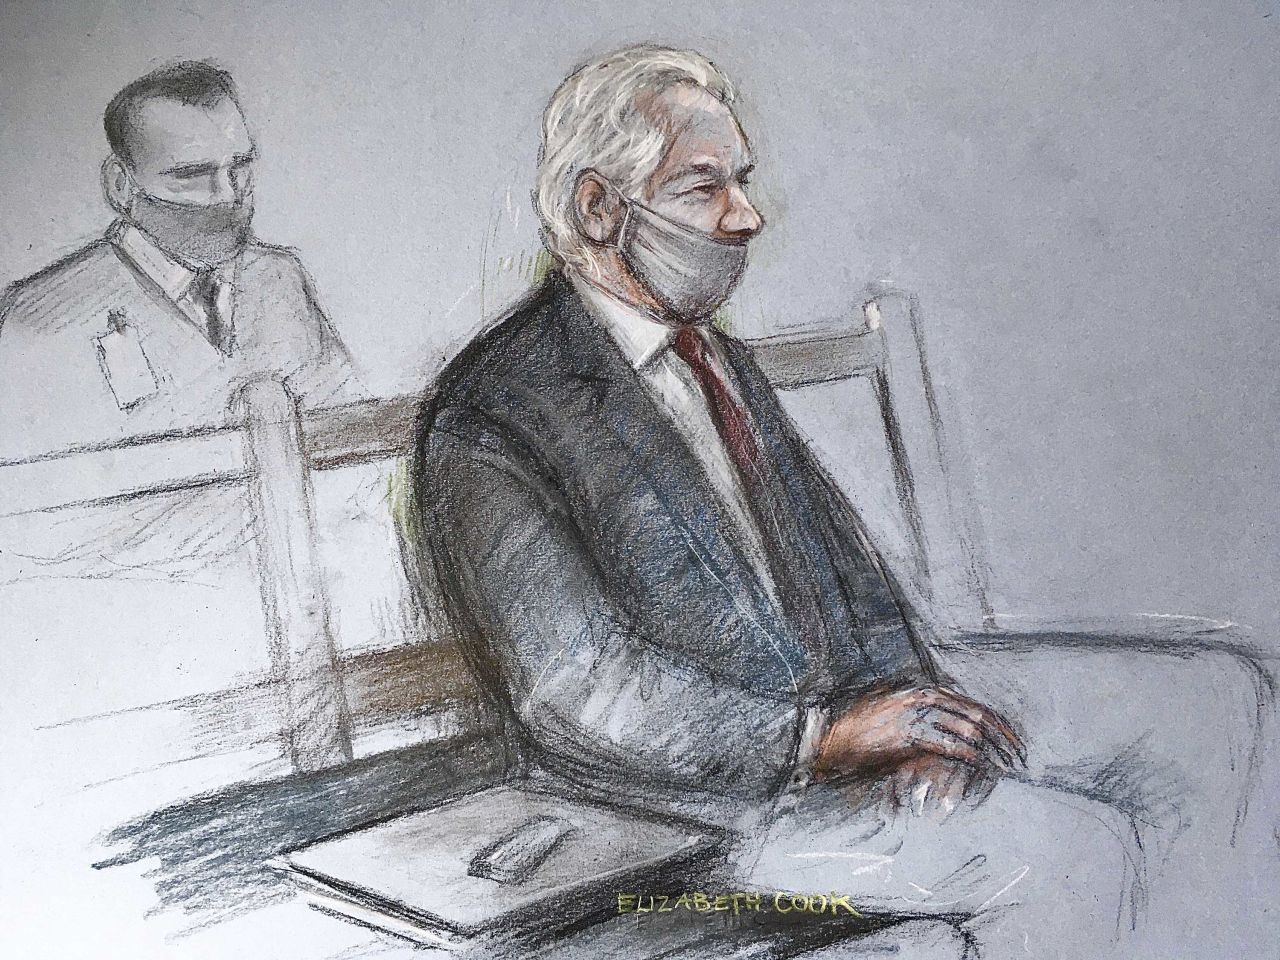 A sketch depicts Assange appearing at the Old Bailey courthouse in London for a ruling in his extradition case on Monday, January 4. A judge <a href="https://edition.cnn.com/2021/01/04/uk/julian-assange-extradition-wikileaks-us-gbr-intl/index.html" target="_blank">rejected a US request to extradite Assange,</a> saying that such a move would be "oppressive" by reason of his mental health. 